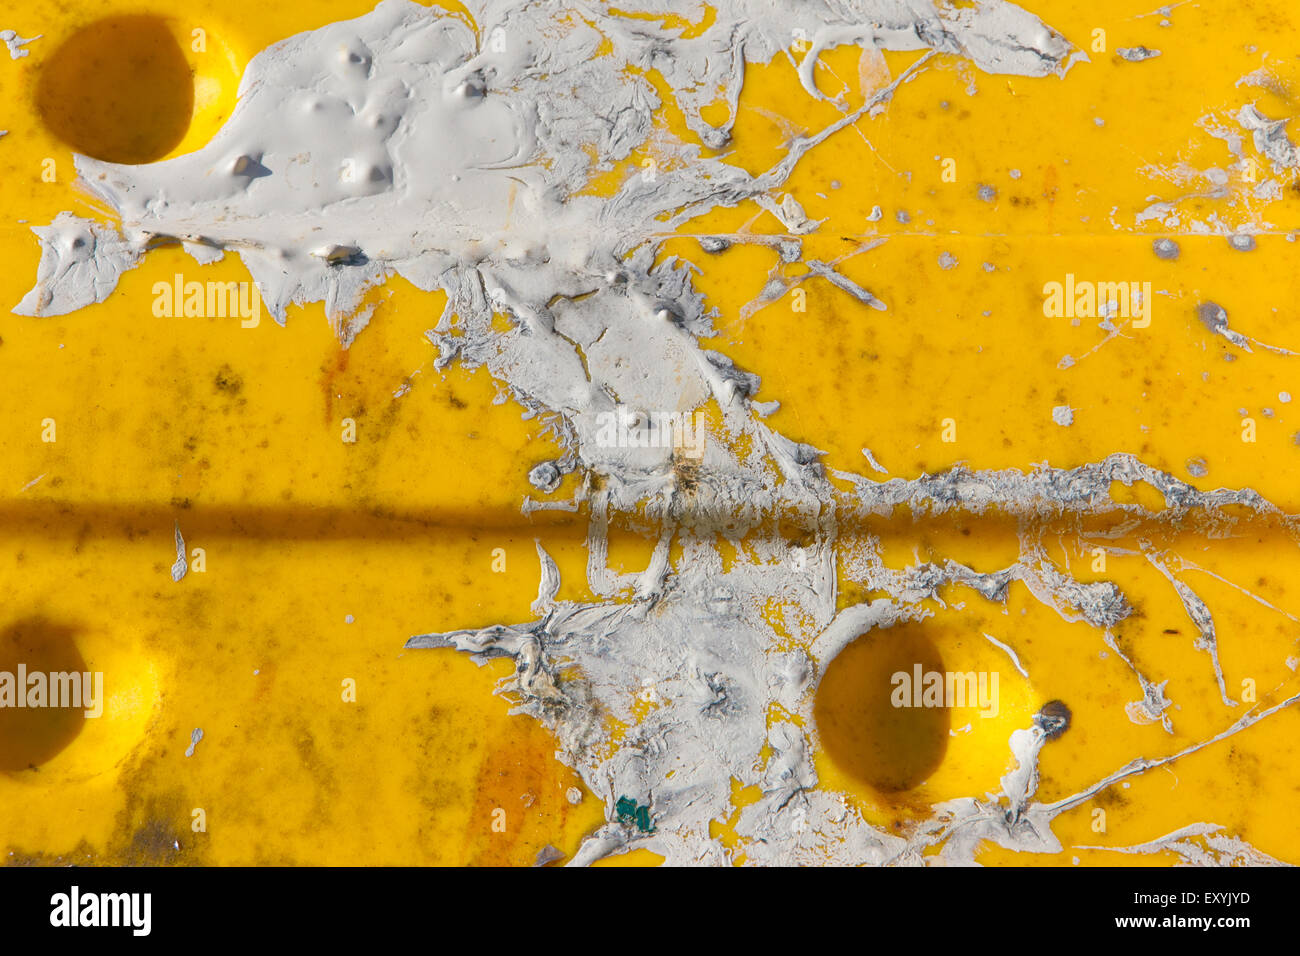 White paint yellow surface round hole abstract Stock Photo